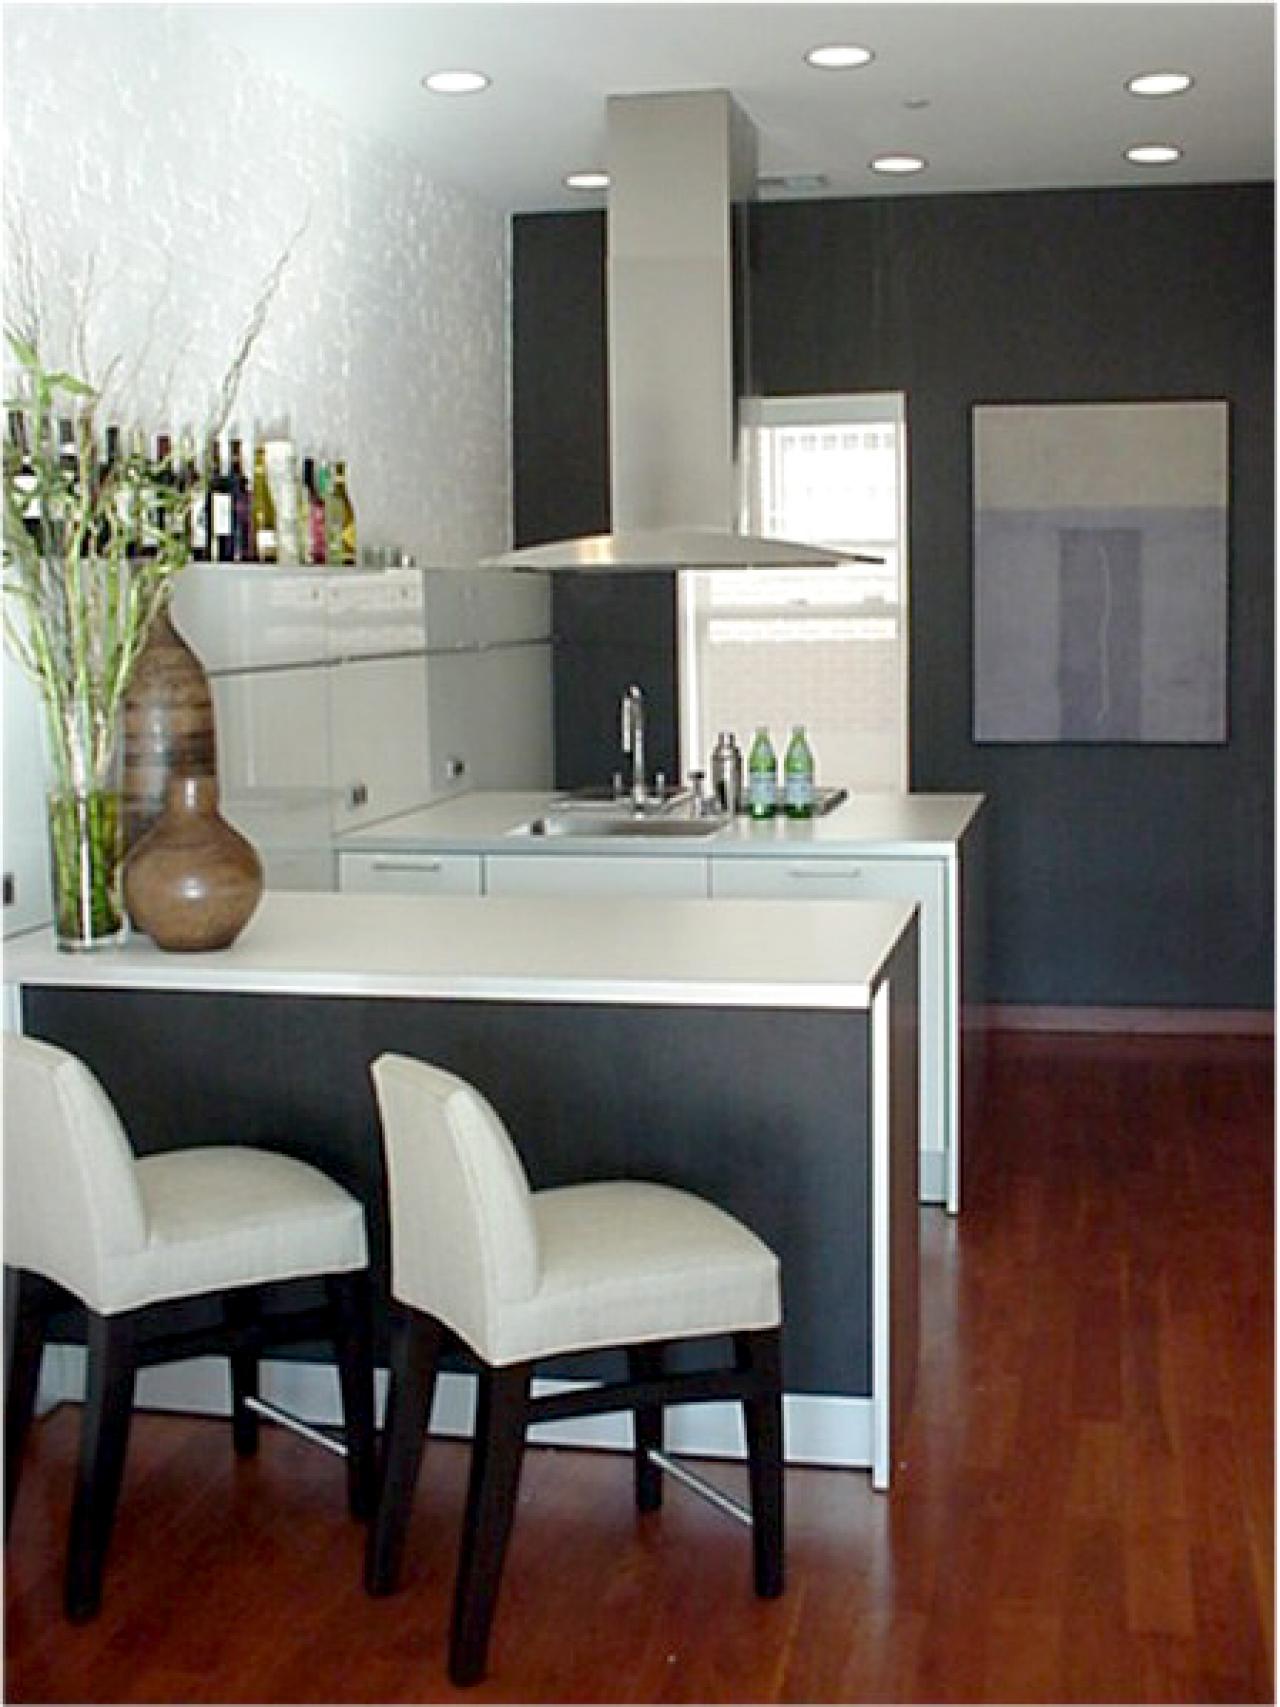 Style Guide For A Contemporary Kitchen Diy,Small White Bathroom Designs